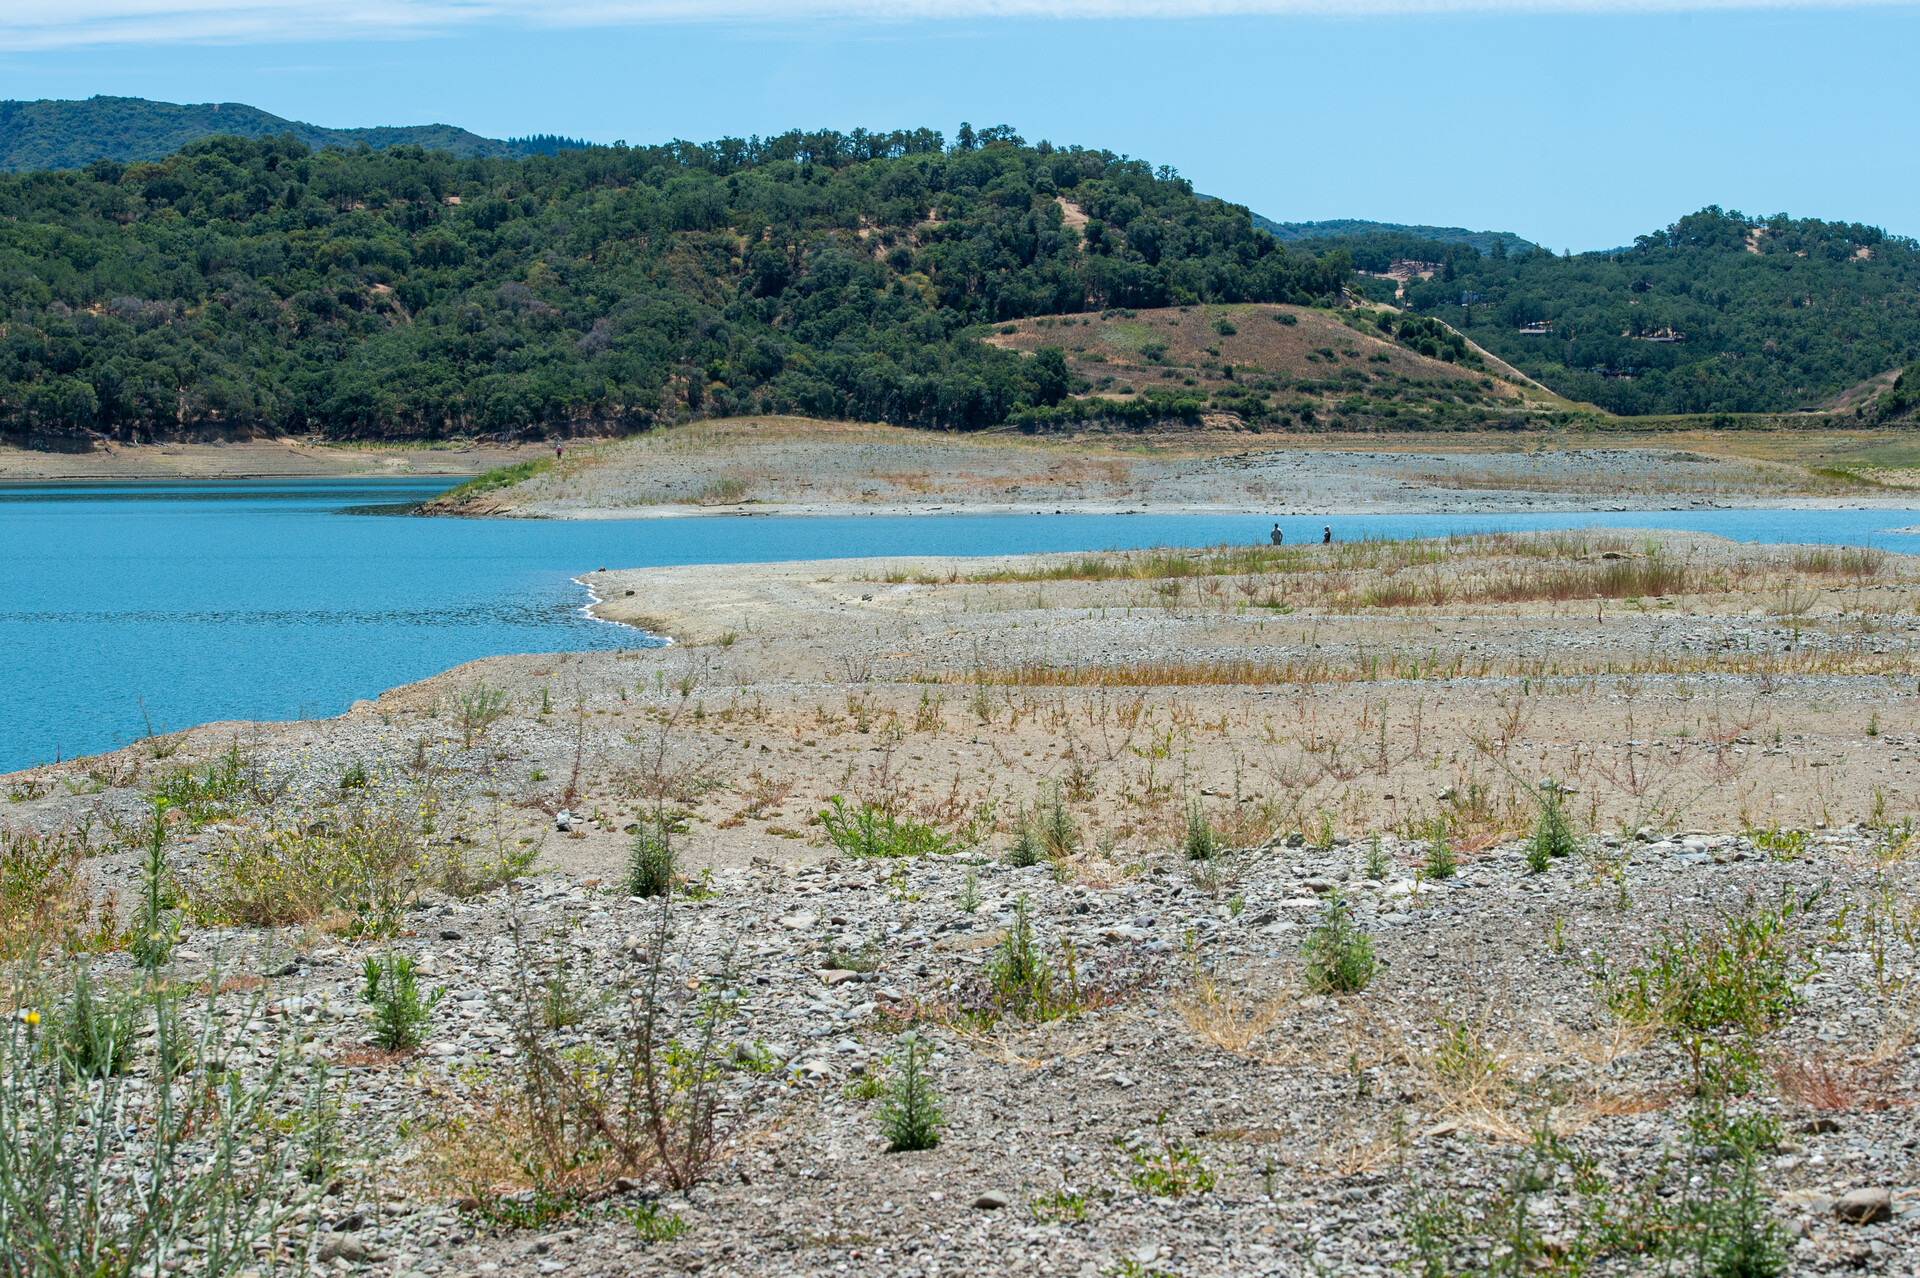 New vegetation grows on what was once the lake bed of Lake Mendocino on June 11, 2021.